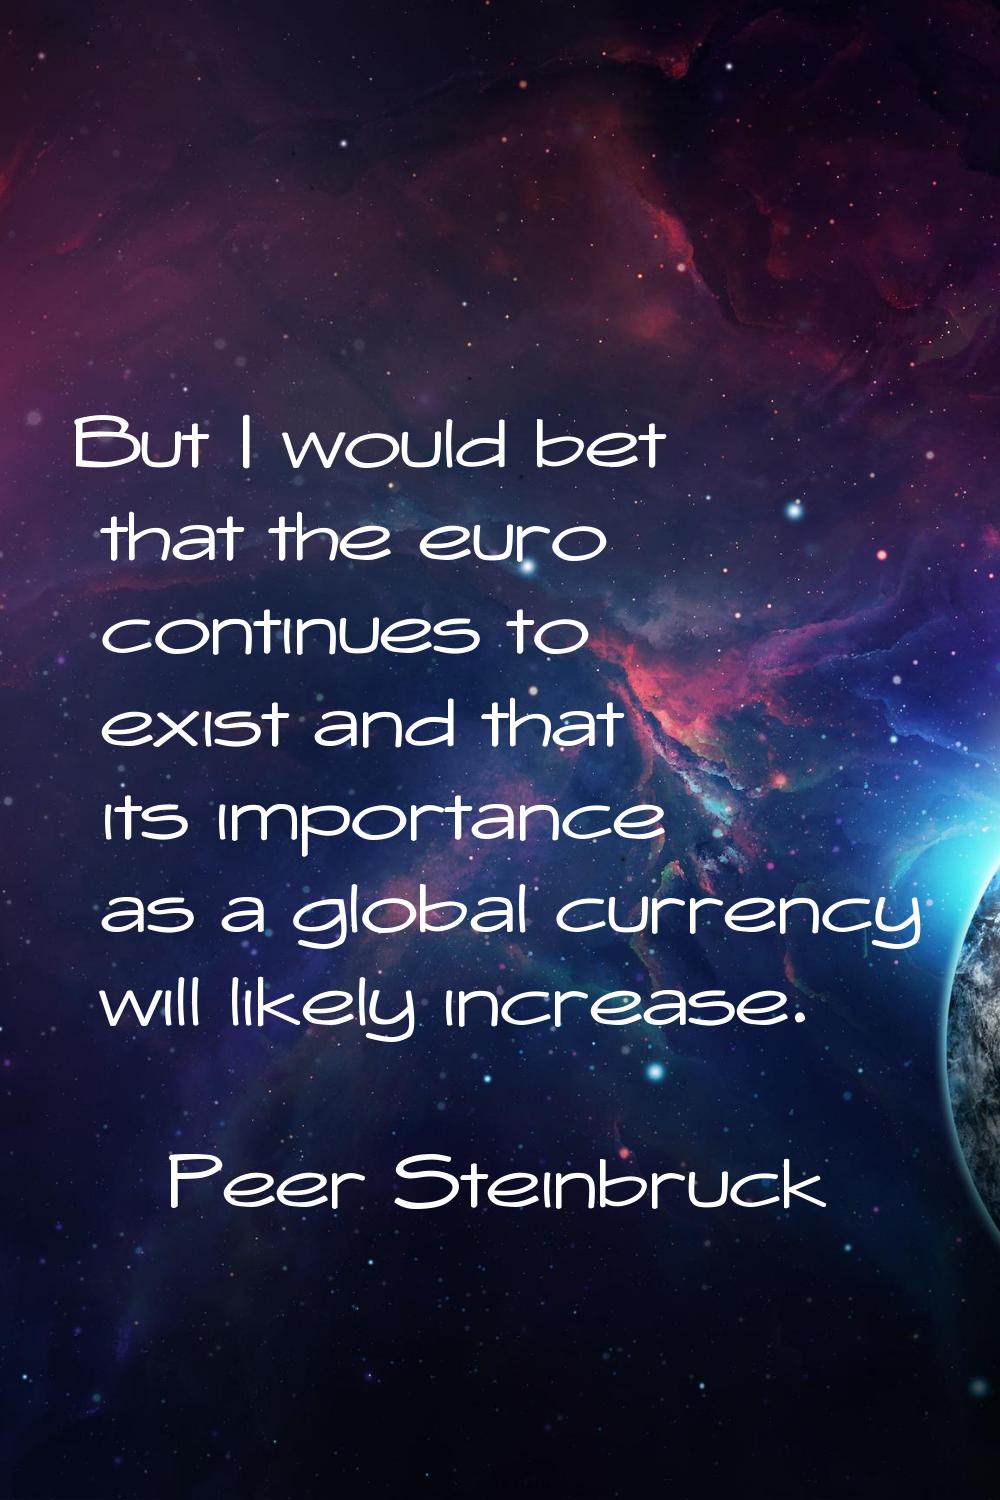 But I would bet that the euro continues to exist and that its importance as a global currency will 